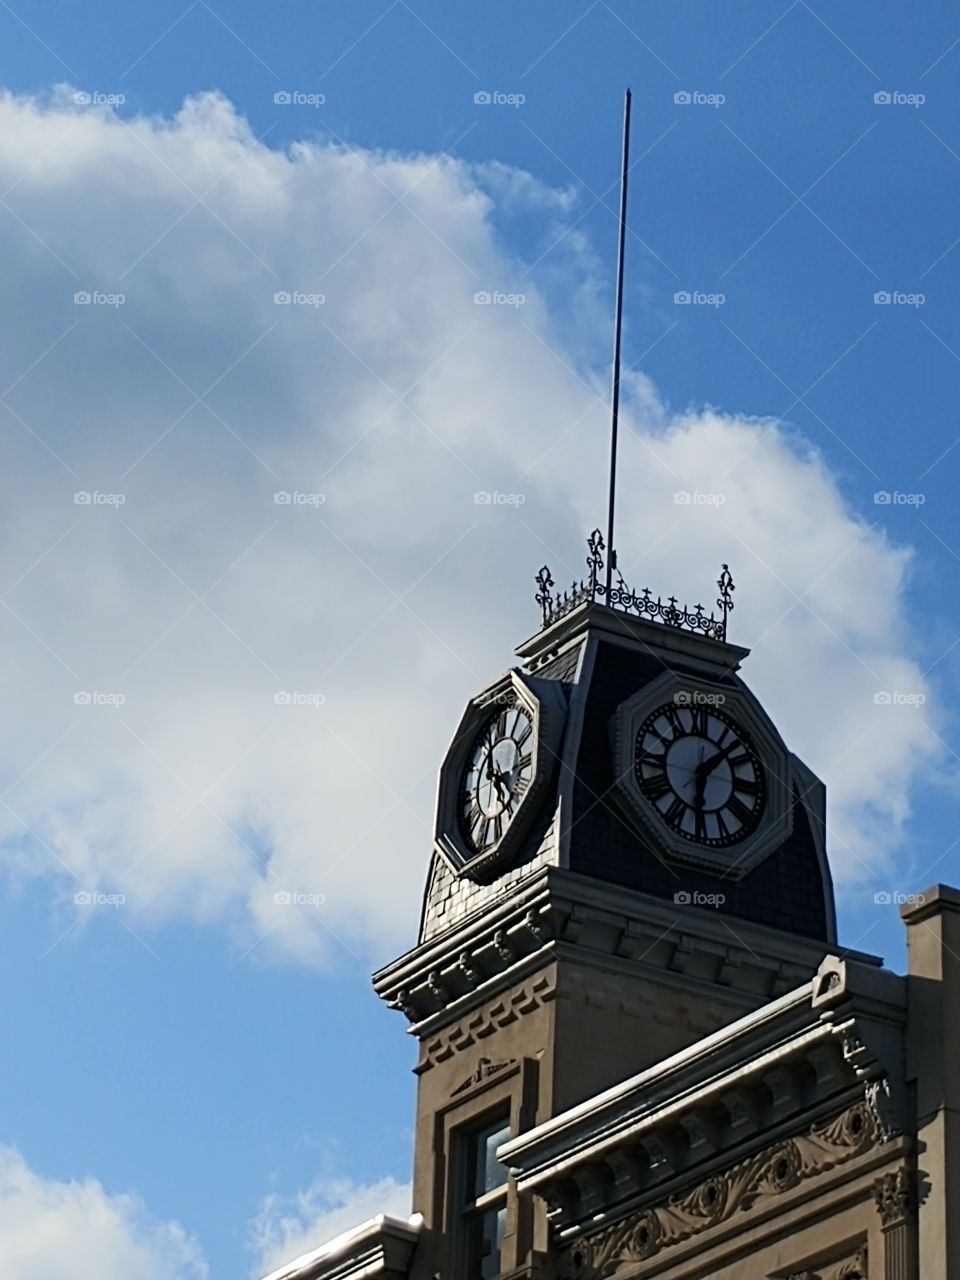 Pictured is a clock tower atop a 19th century building with a cloud filled sky